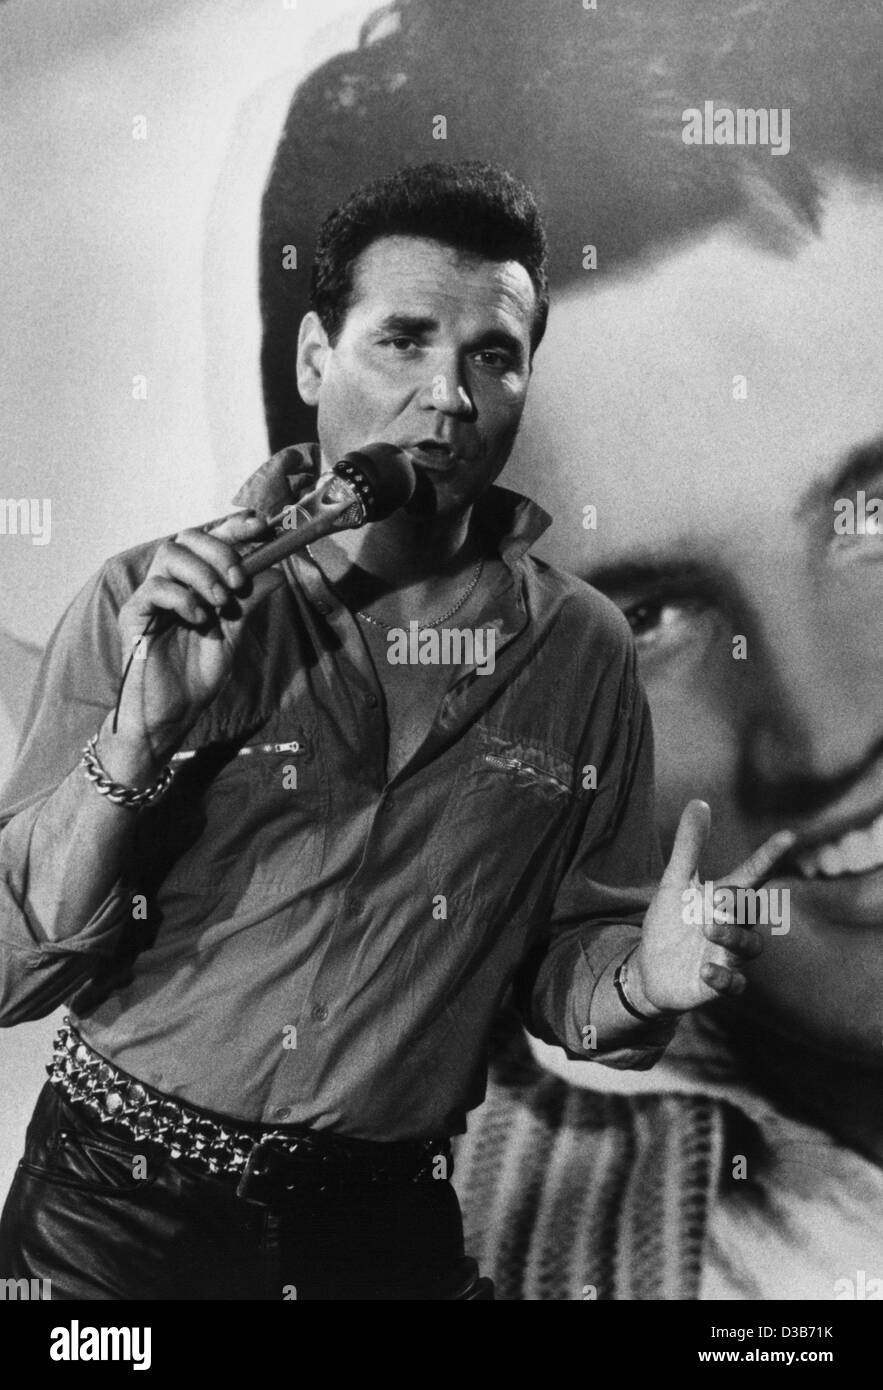 (dpa files) - German Rock'N'Roll legend Ted Herold performs in front of an Elvis Presley poster in Hamburg, 14 August 1987. Herold will celebrate his 60th birthday on 9 September 2002. He started his career in his high school time after he had got a guitar for Christmas in 1956. 'The German Elvis Pr Stock Photo